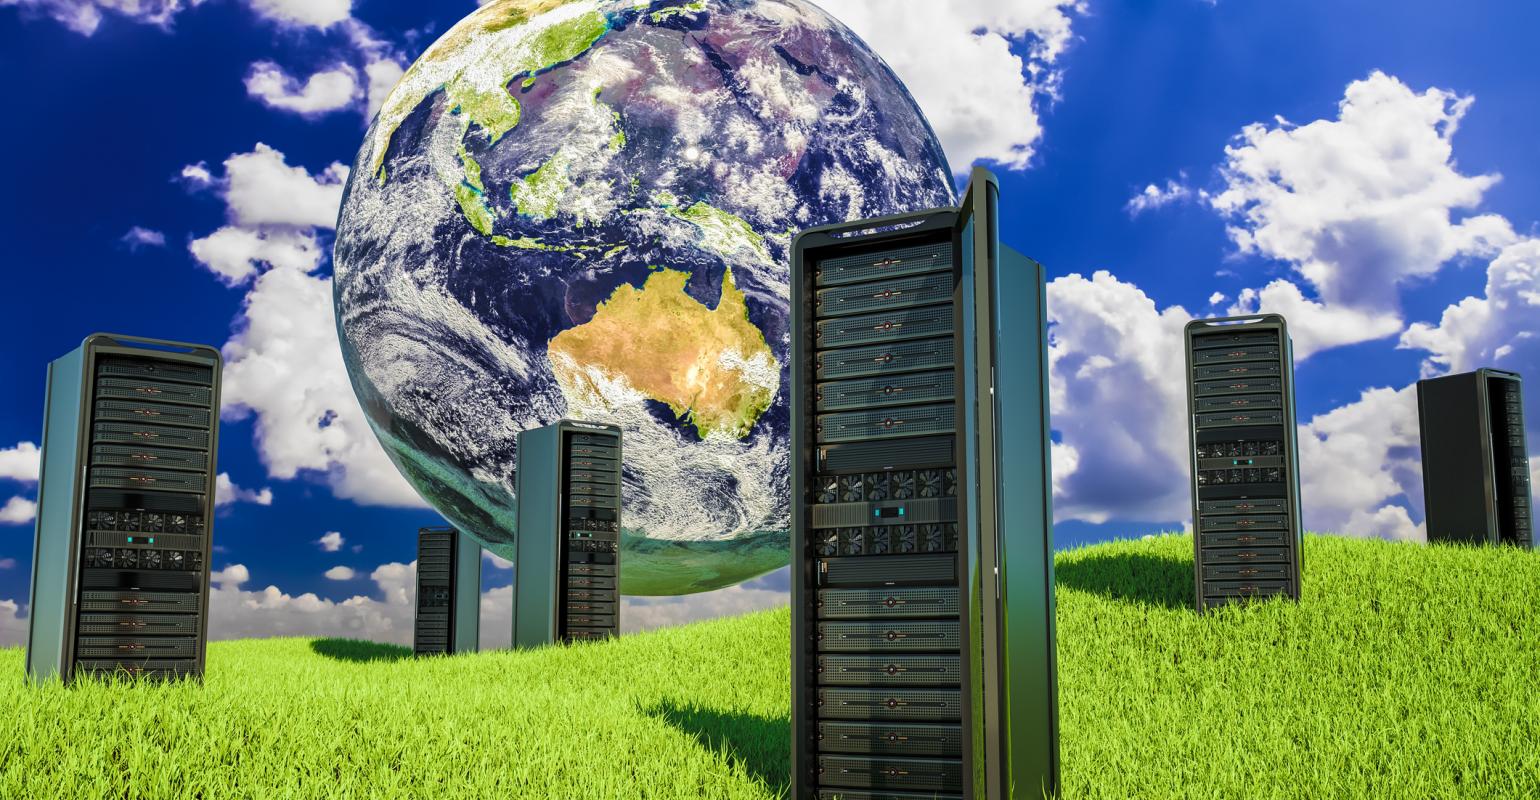 10 Tips for Selecting a Green Data Center Partner | Data Center Knowledge